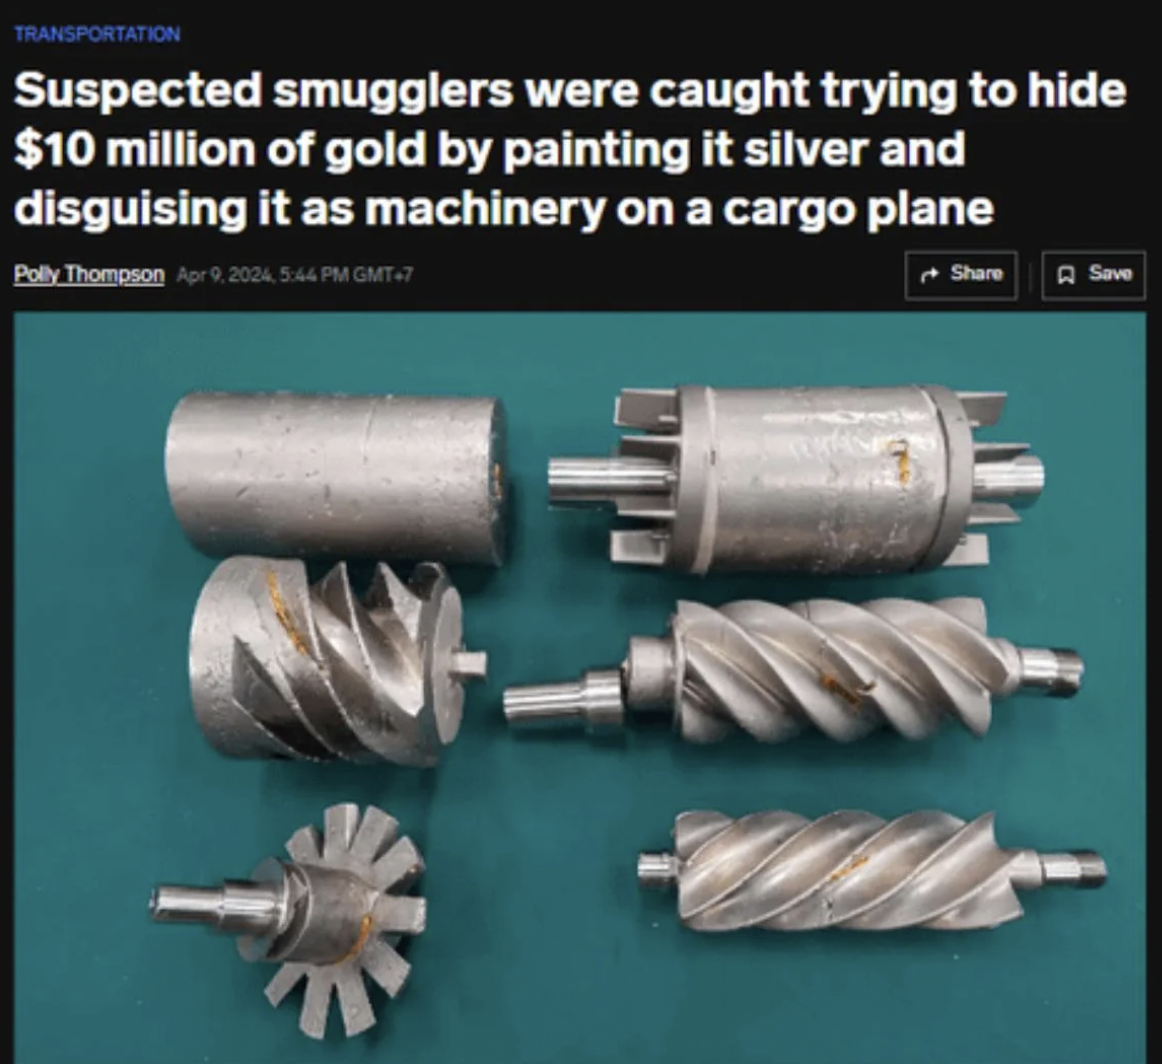 Smuggling - Transportation Suspected smugglers were caught trying to hide $10 million of gold by painting it silver and disguising it as machinery on a cargo plane Polly Thompson Apr 9.2024, Gmt7 Save